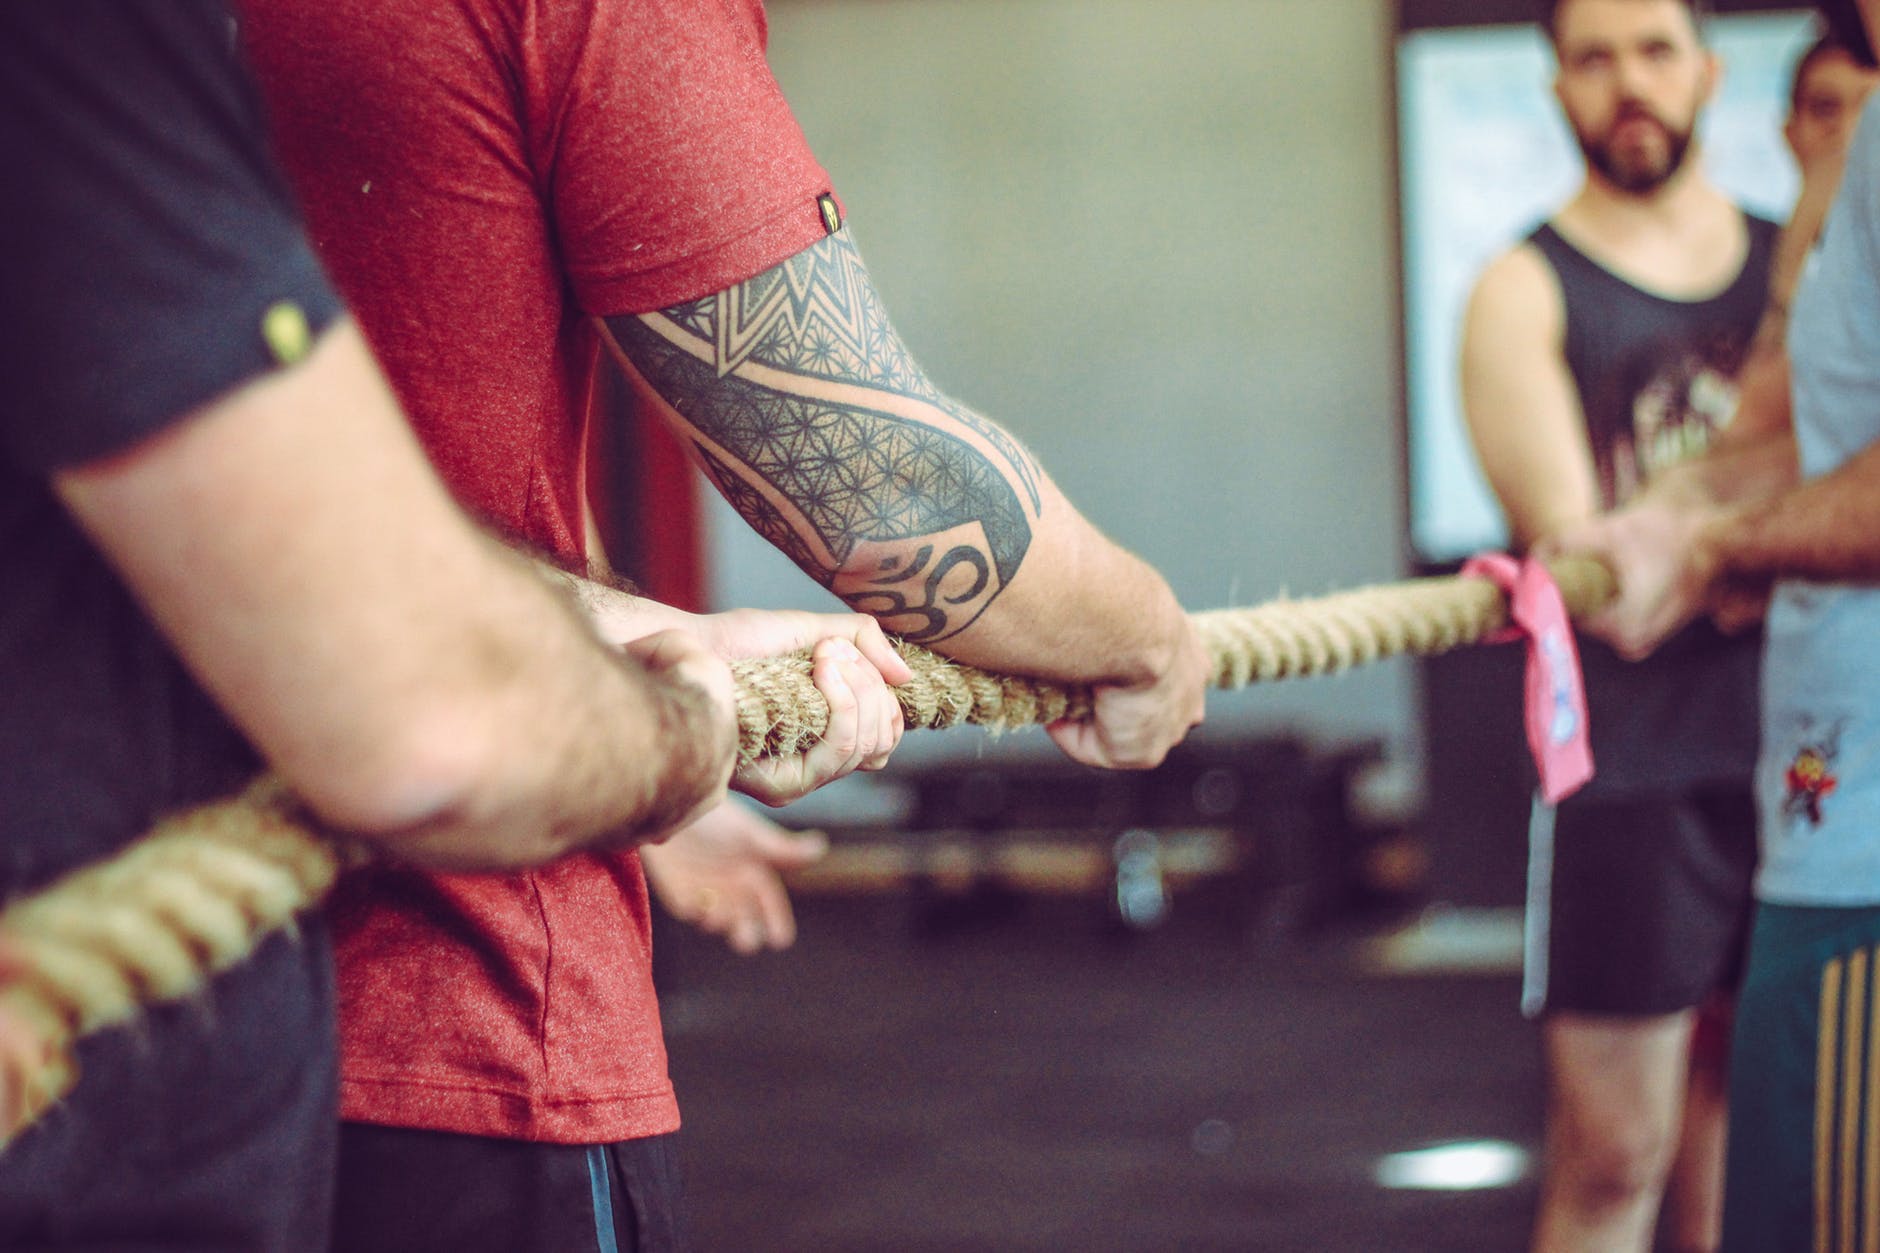 Men playing tug of war with a thick rope.